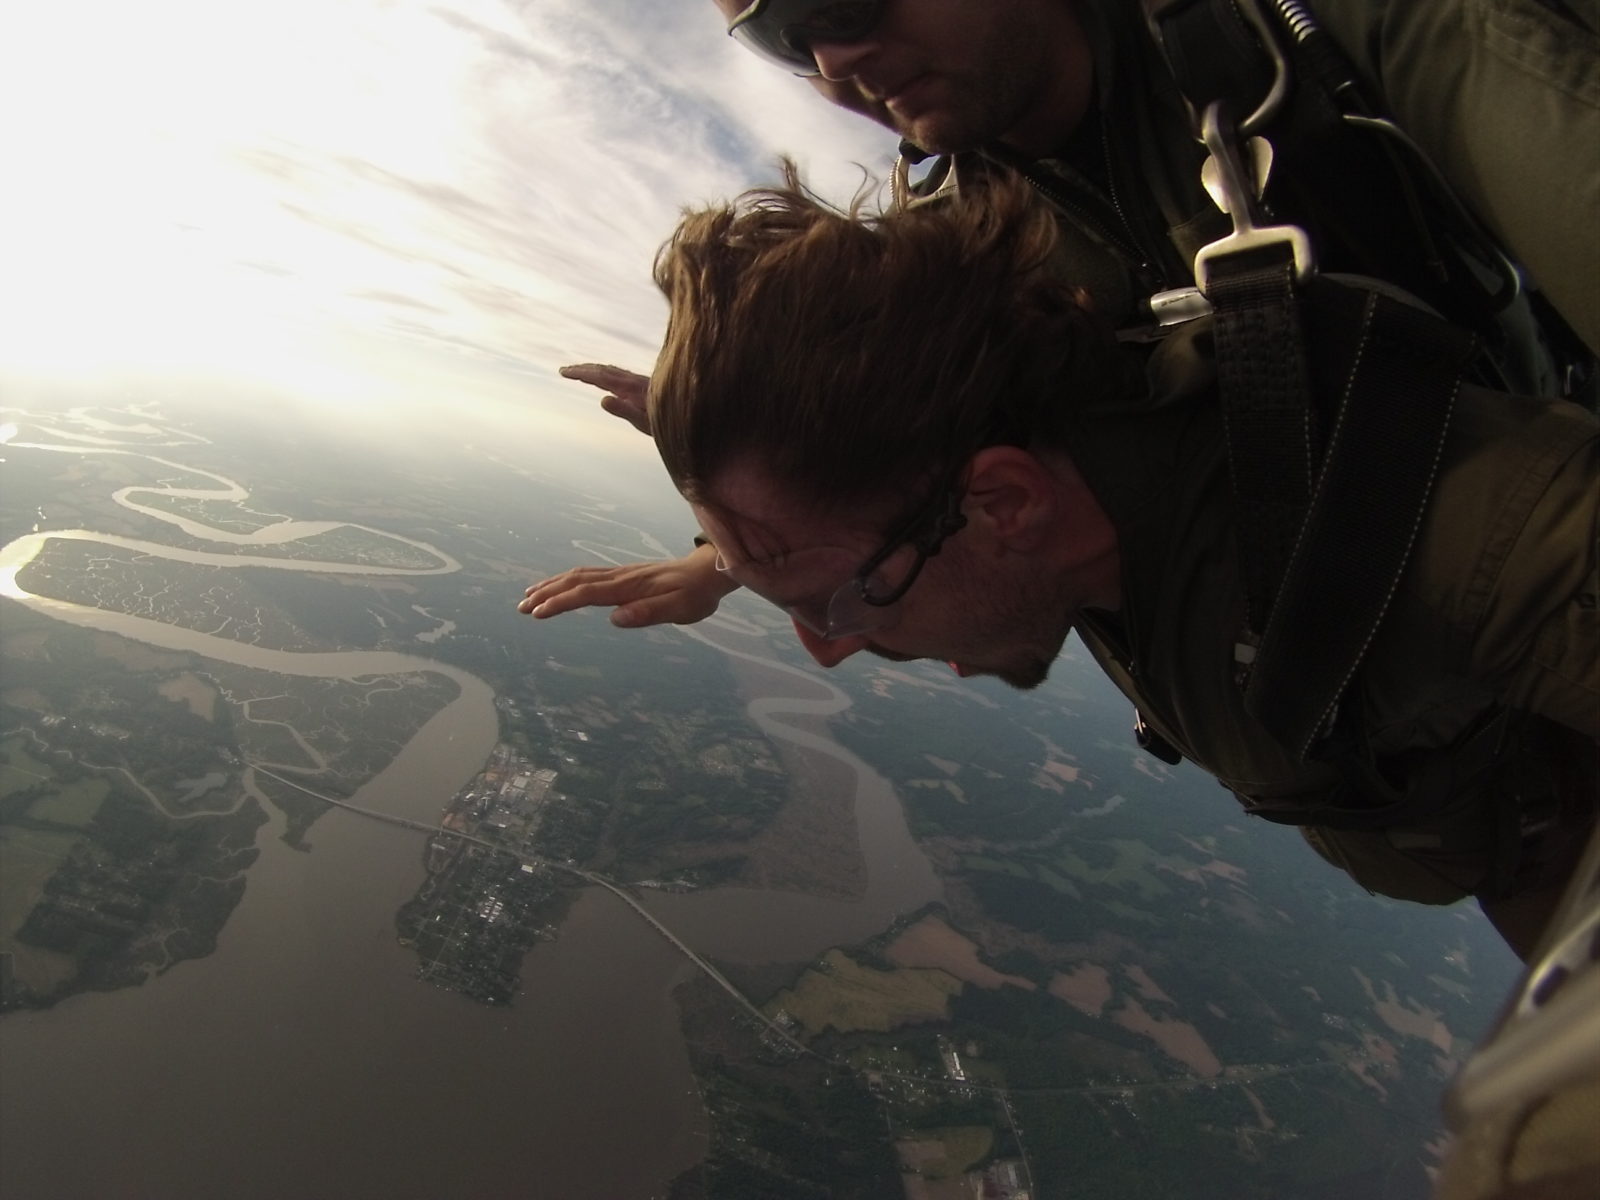 You are currently viewing July 4th skydiving event in Virginia